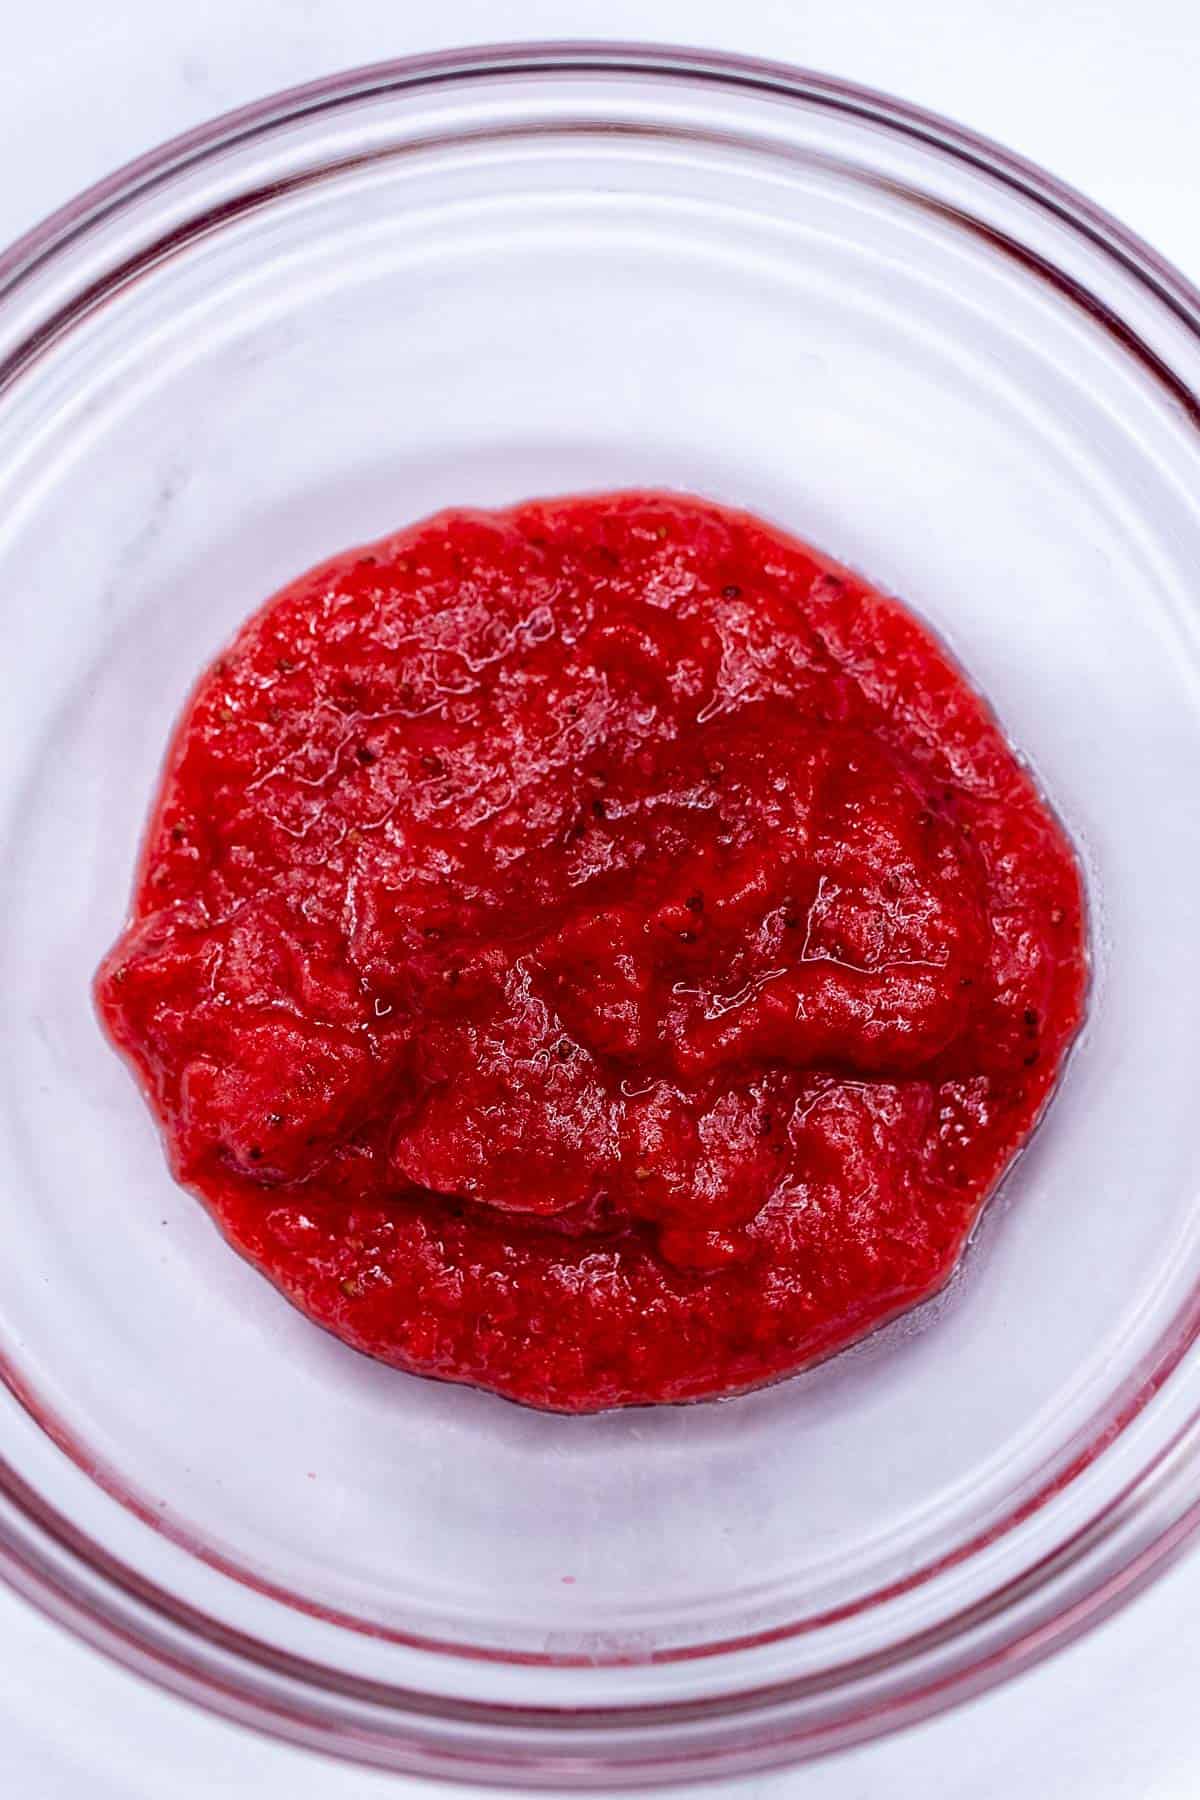 Strawberry puree reduced on stovetop in a heatproof bowl.